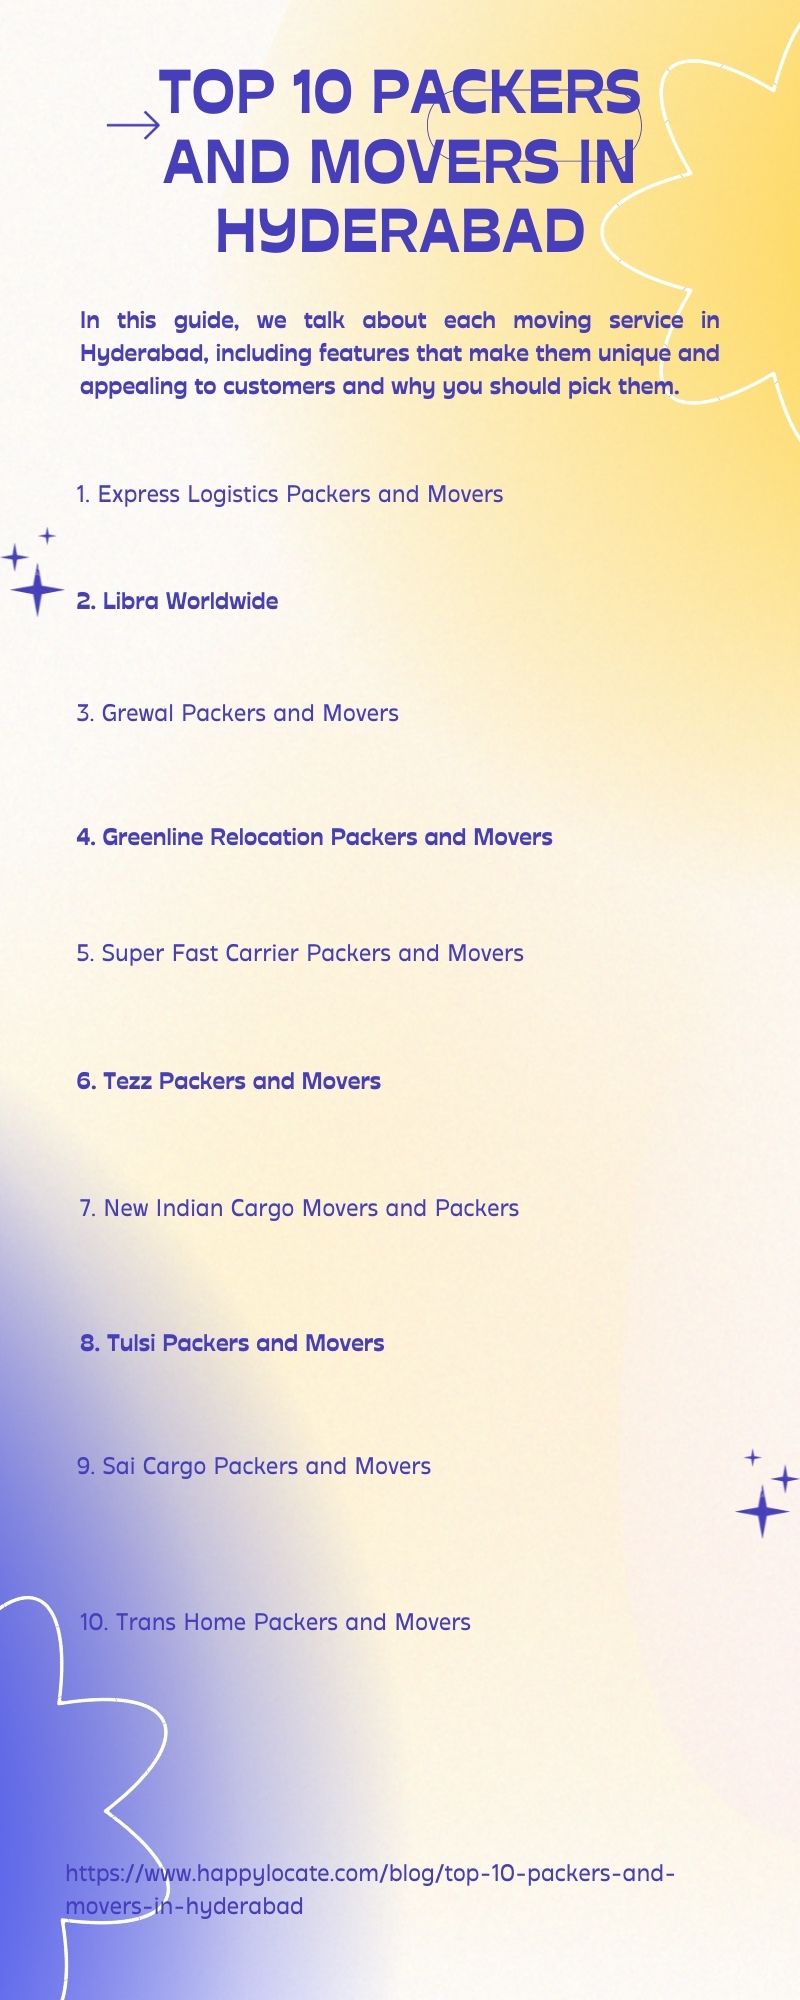 _,TOP 10 PACKERS
"AND MOVERS IN
HYDERABAD

In this guide, we talk about each moving service in
Hyderabad, including features that make them unique and
appealing to customers and why you should pick them.

1. Express Logistics Packers and Movers

} 2. Libra Worldwide

3. Grewal Packers and Movers

4. Greenline Relocation Packers and Movers

S. Super Fast Carrier Packers and Movers
6. Tezz Packers and Movers

7. New Indian Cargo Movers and Packers

    
  
  
 

8. Tulsi Packers and Movers

Cargo Packers and Movers ps

lome Packers and Movers

ppylocate.com/blog/top-10-packers-and-
rabad